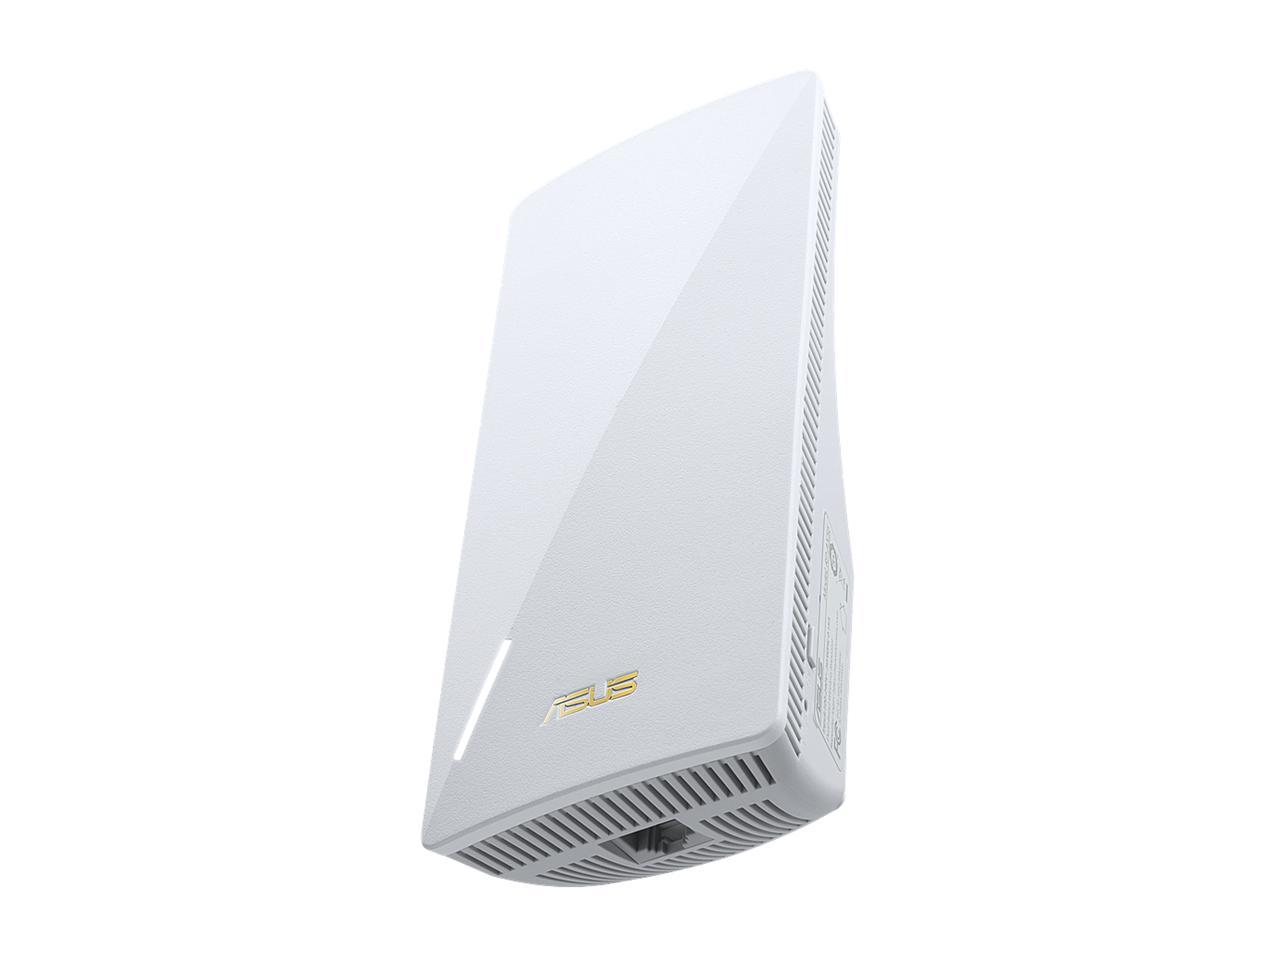 ASUS AX1800 Dual Band WiFi 6 (802.11ax) Repeater & Range Extender (RP-AX56) - Coverage Up to 2200 sq.ft, Wireless Signal Booster for Home, AiMesh Node, Easy Setup